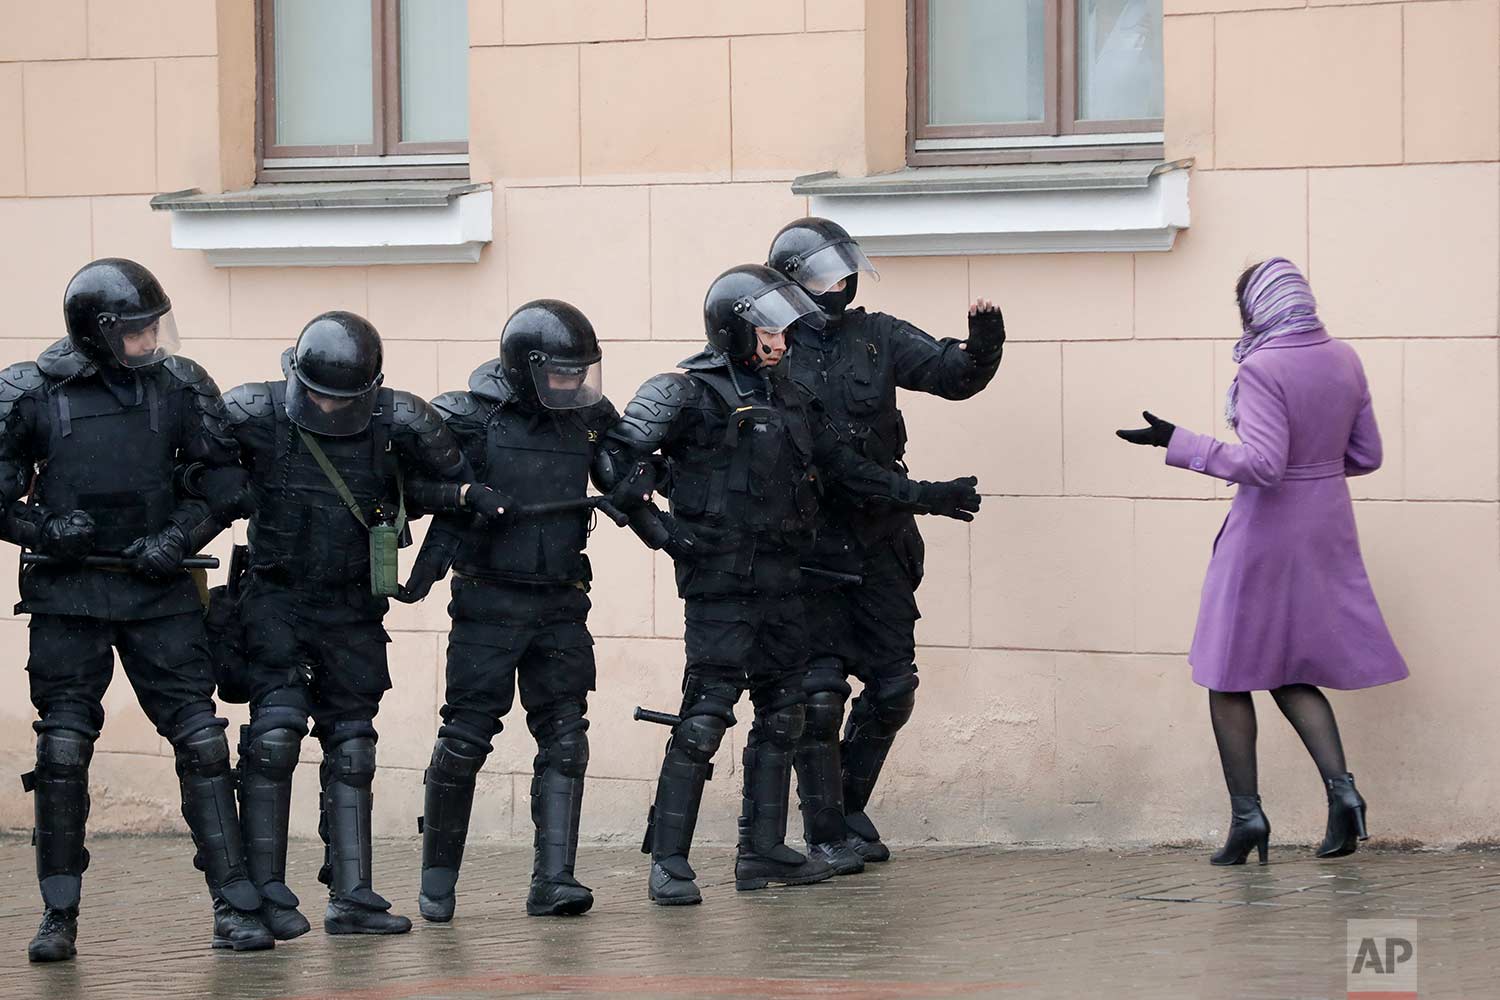  In this Saturday, March 25, 2017 photo, a woman argues as Belarus police block a street during an opposition rally in Minsk, Belarus. A cordon of club-wielding police blocked the demonstrators' movement along Minsk's main avenue near the Academy of 